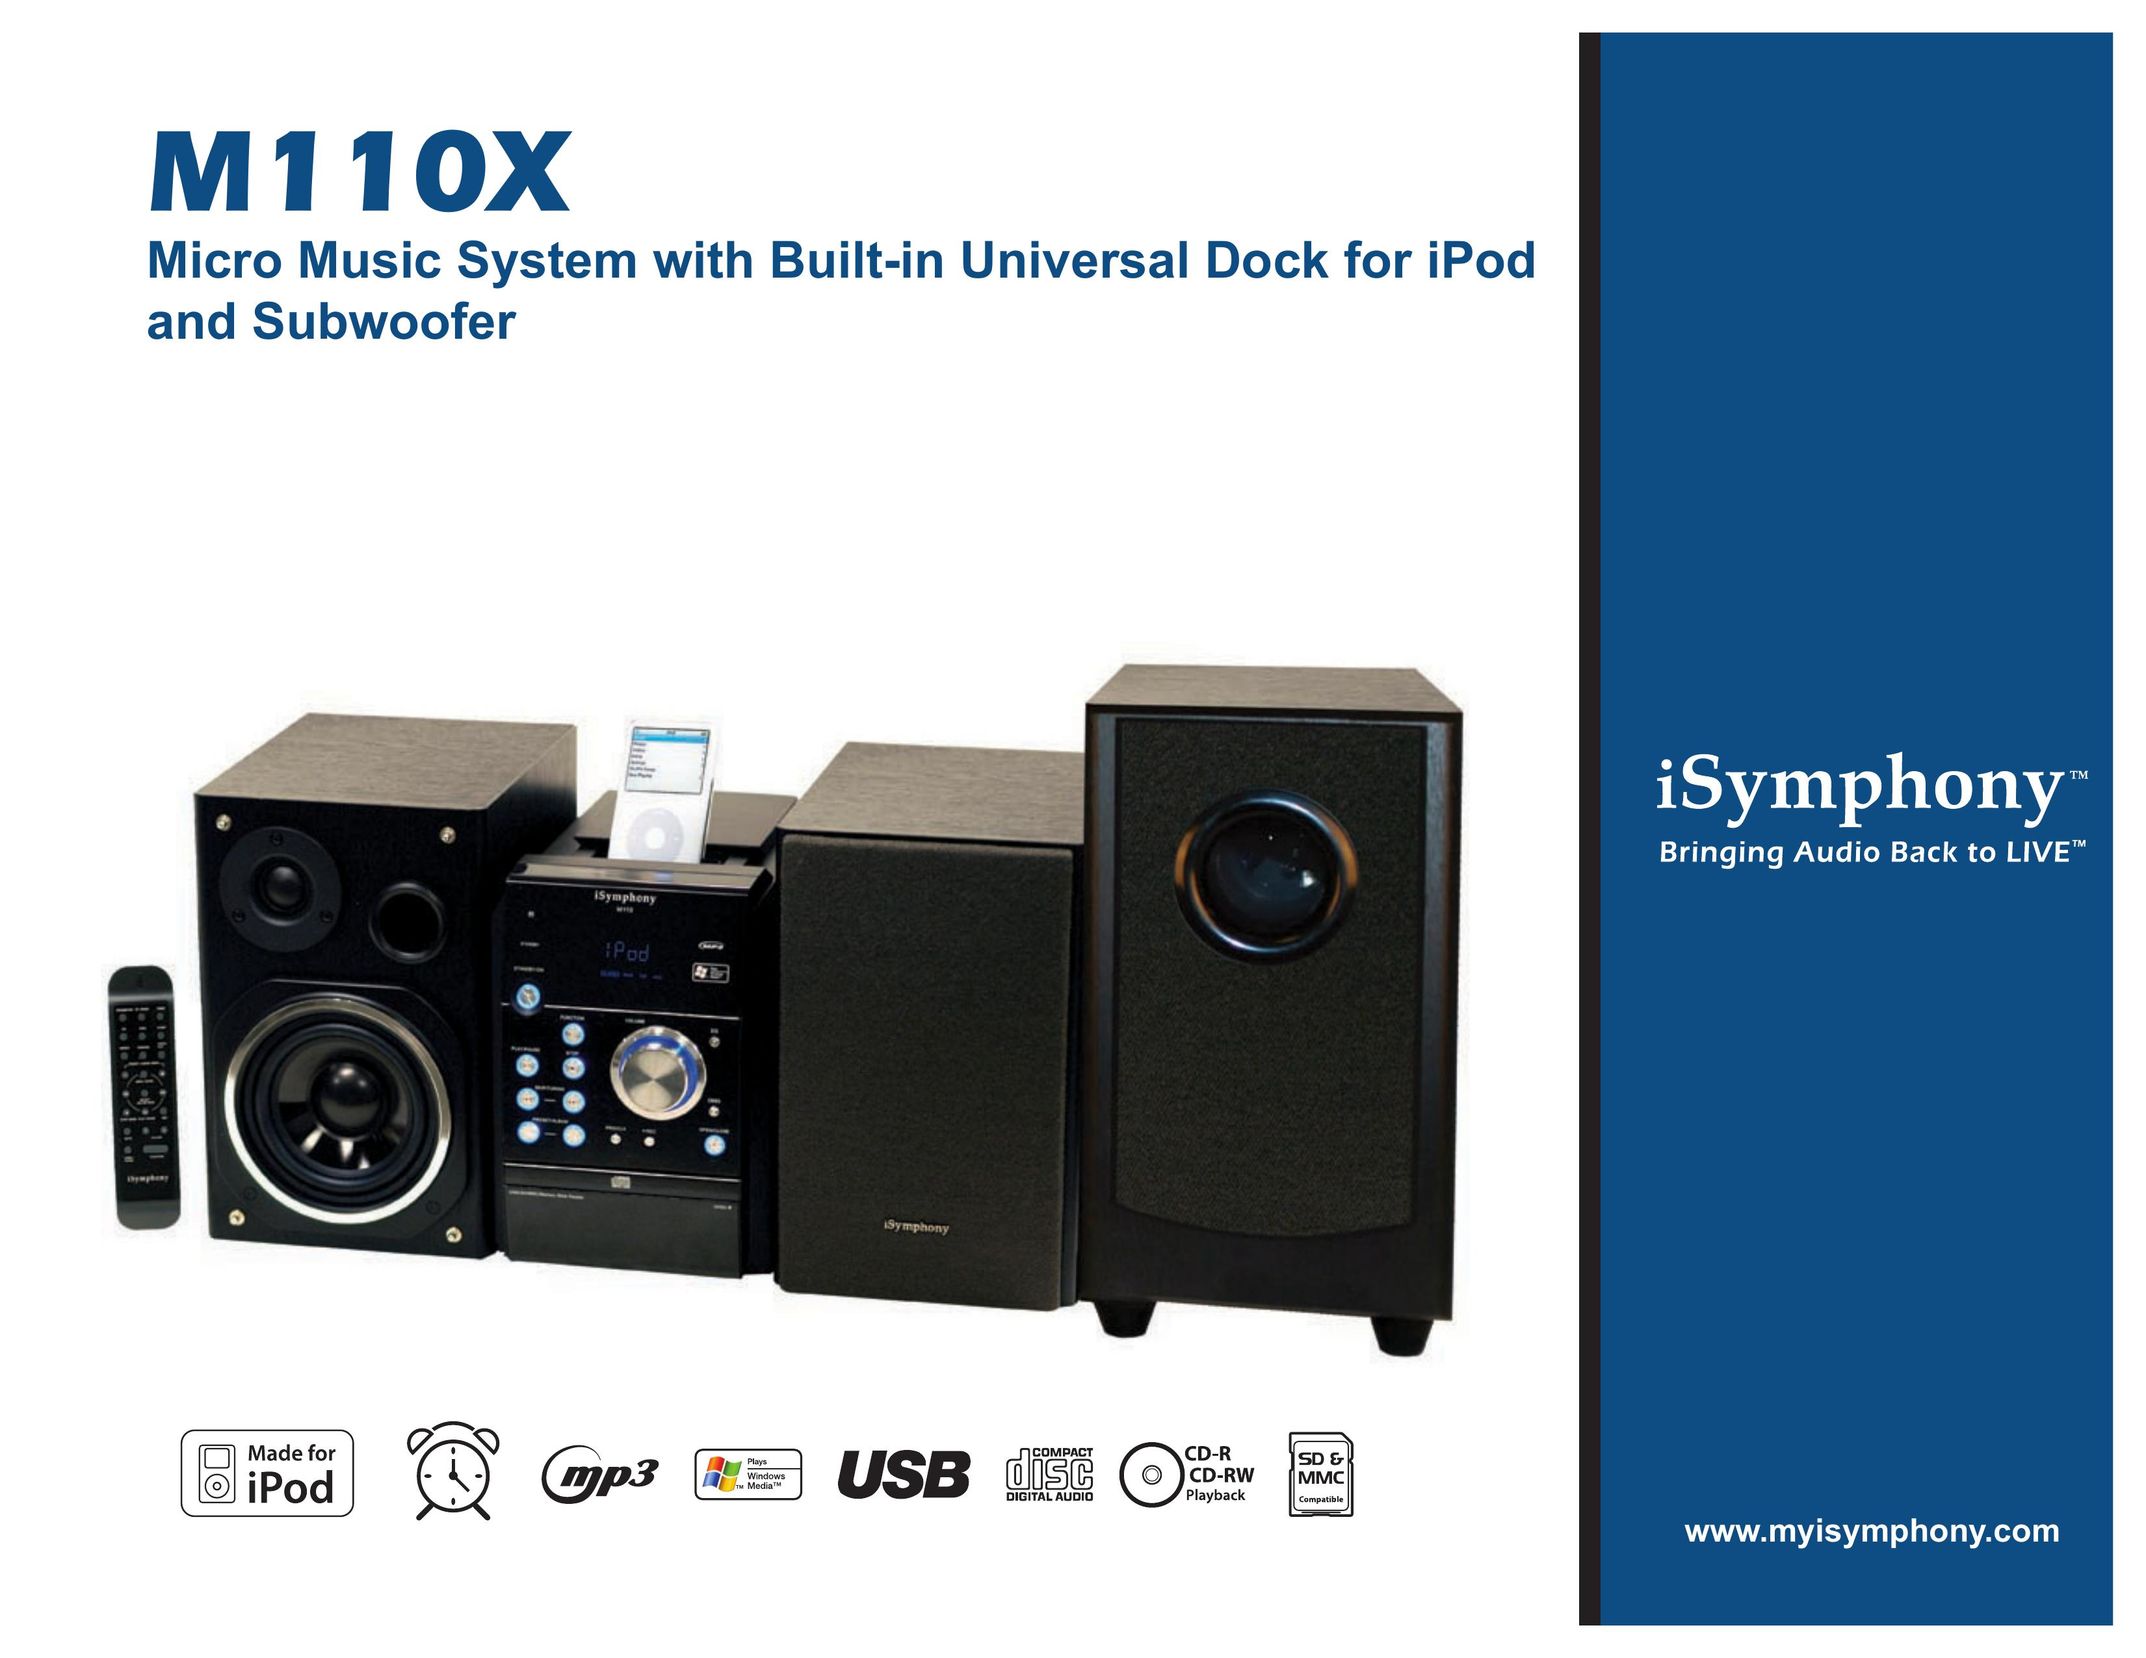 iSymphony M110X Home Theater System User Manual